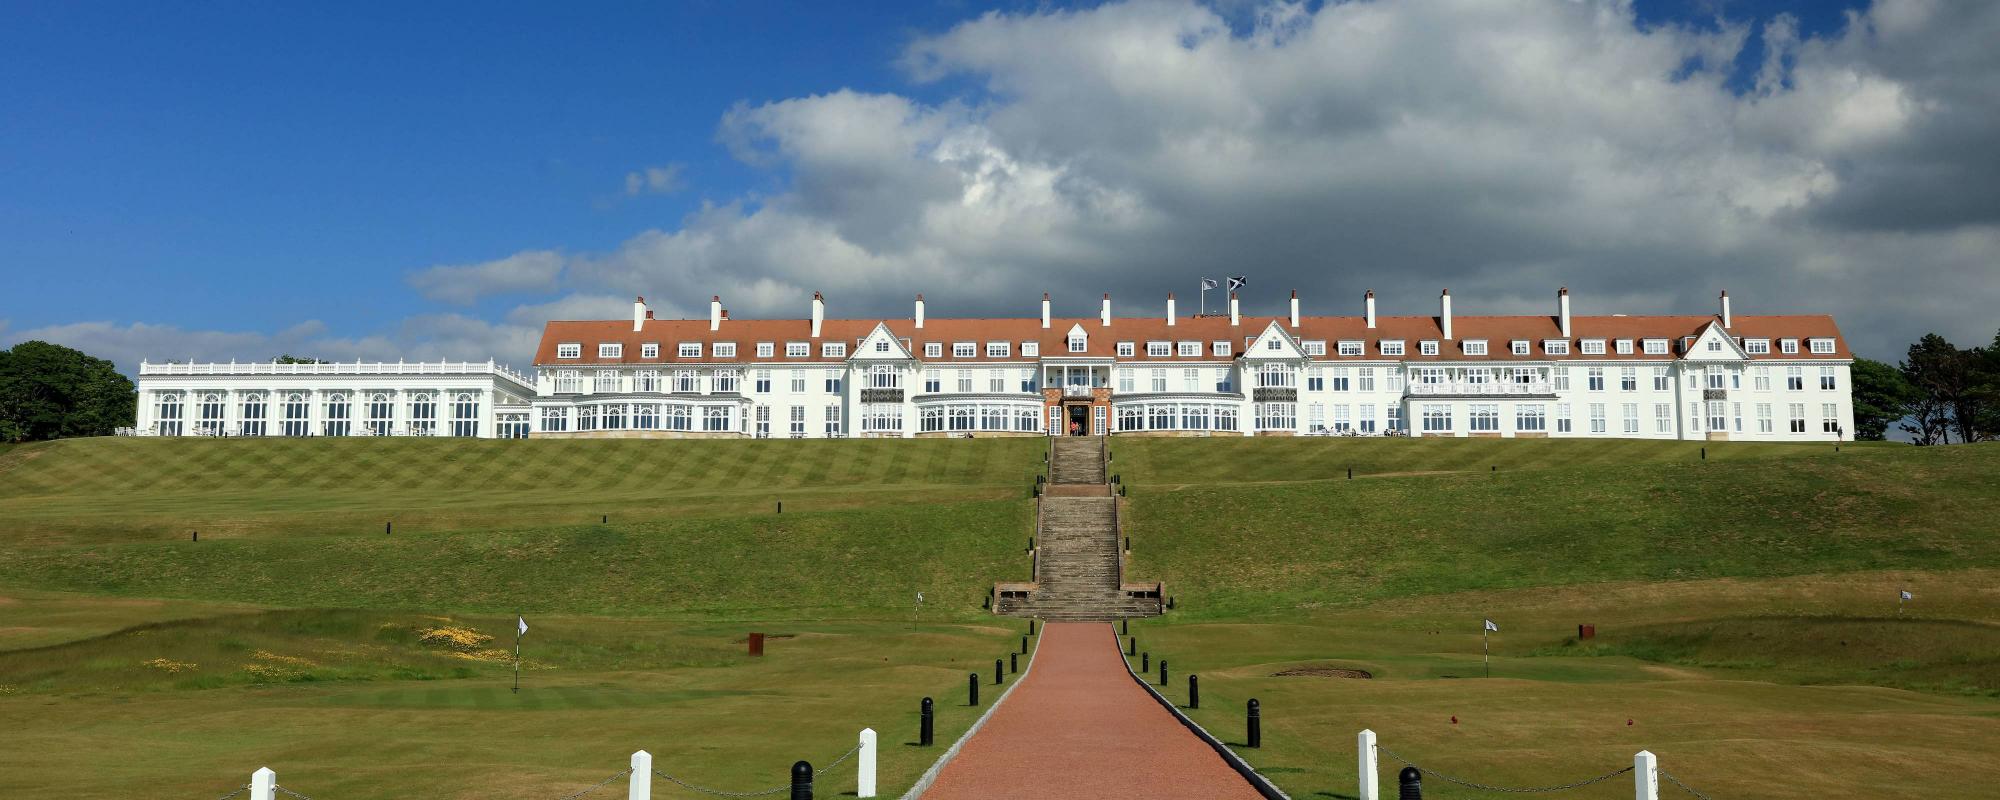 View Trump Turnberry's lovely hotel in marvelous Scotland.